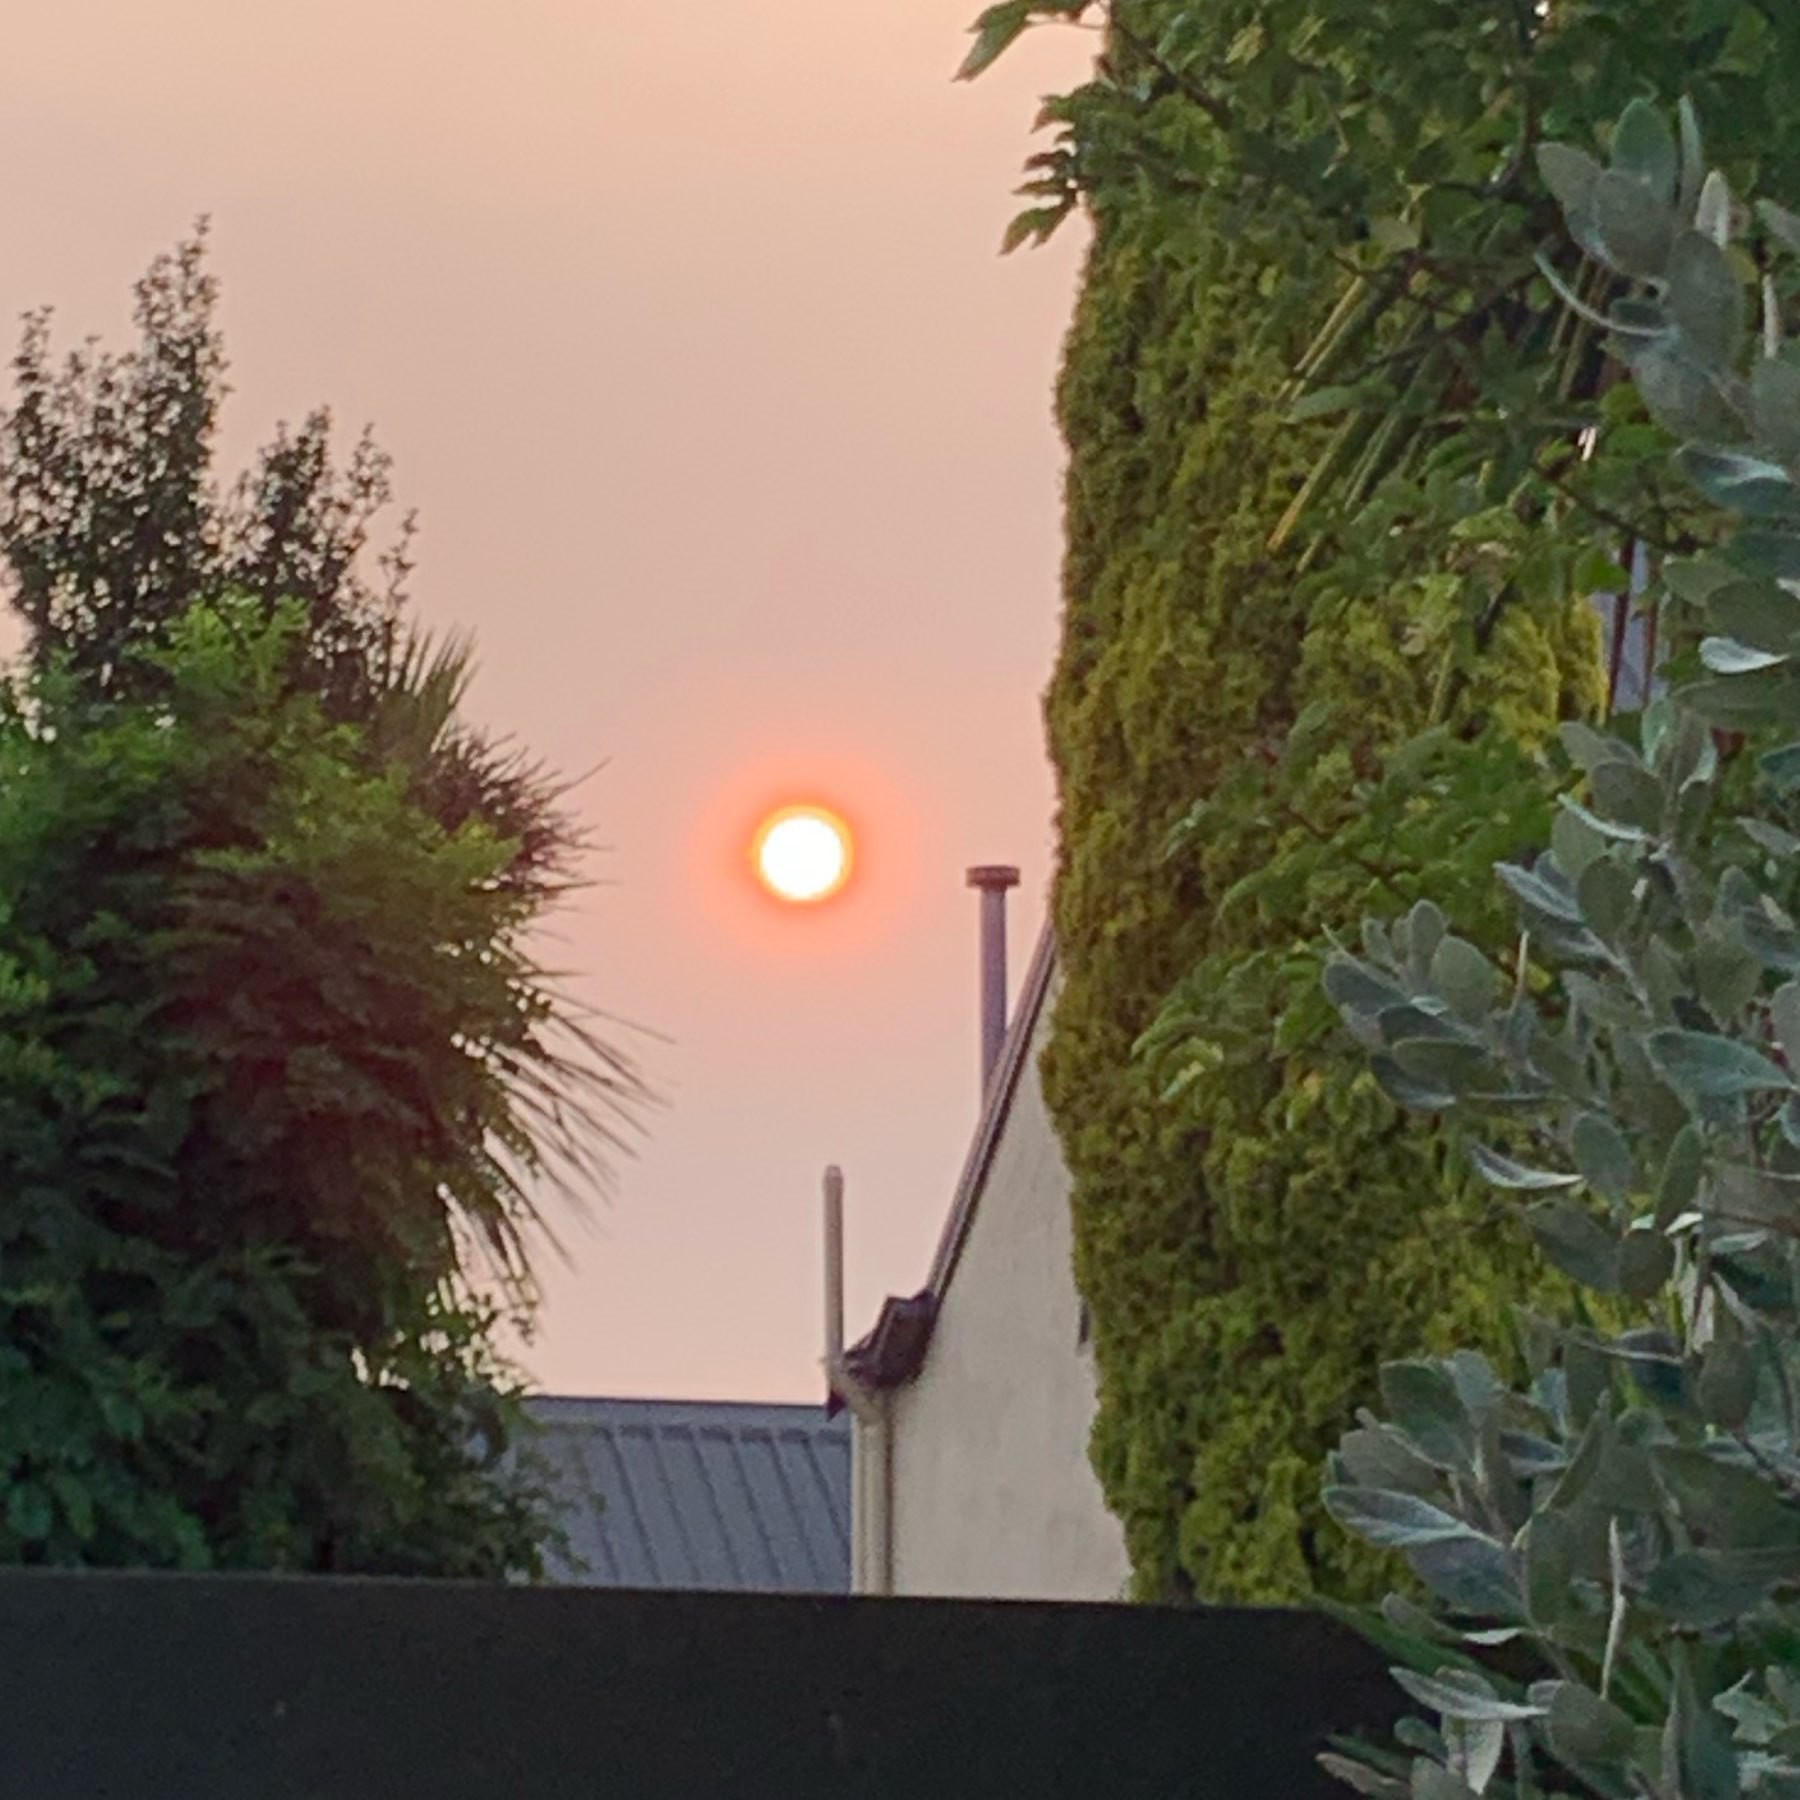 The sun, about an hour before setting, loking extremely orange/red thanks to particles of ash 